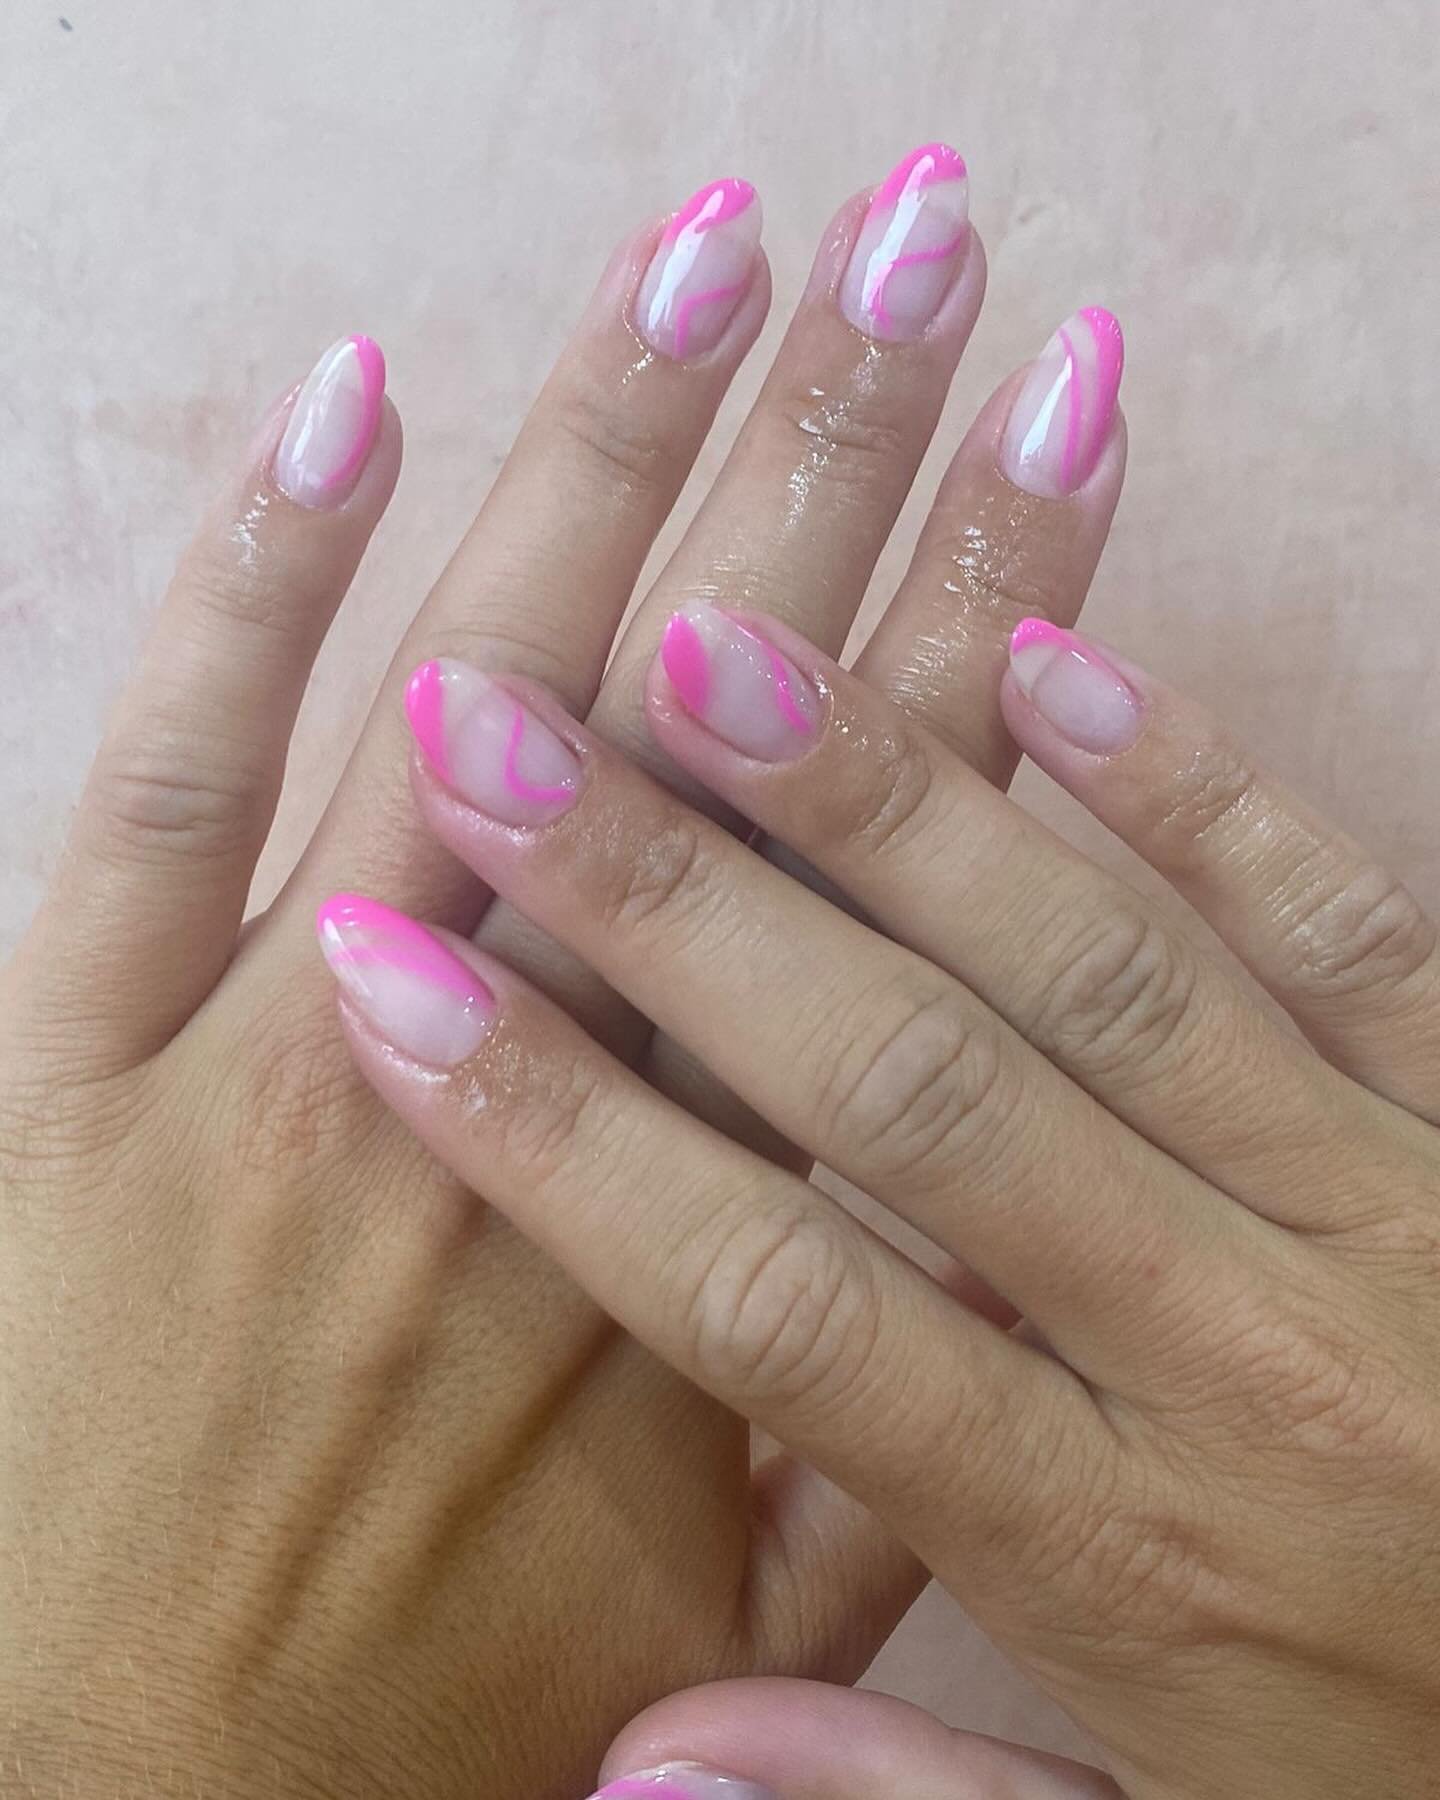 Make it #barbie but with a twist 🙄💕💗 How perfect are these pink swirls on our clients nails yesterday?! 😍 

#bali #balinails #manicure #nailart #balinailart #canggunails #canggu #pinknails